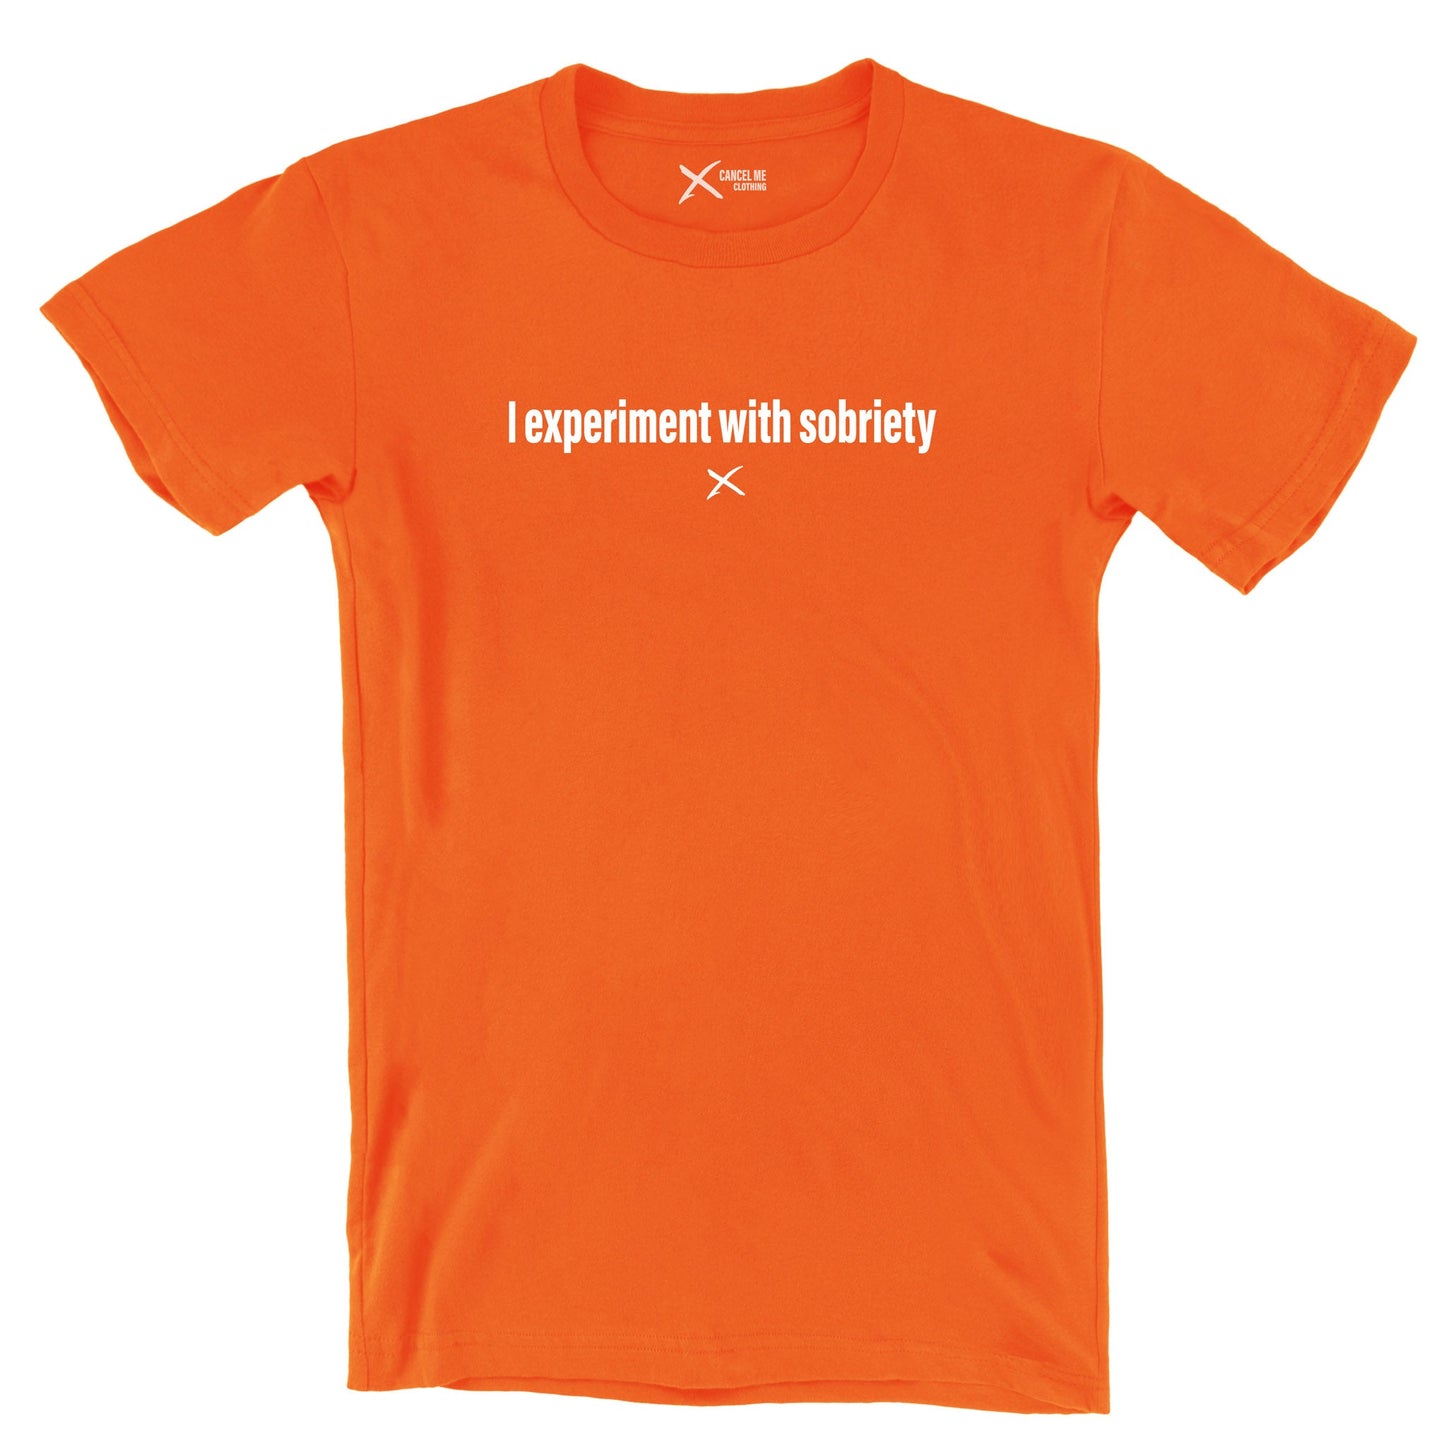 I experiment with sobriety - Shirt